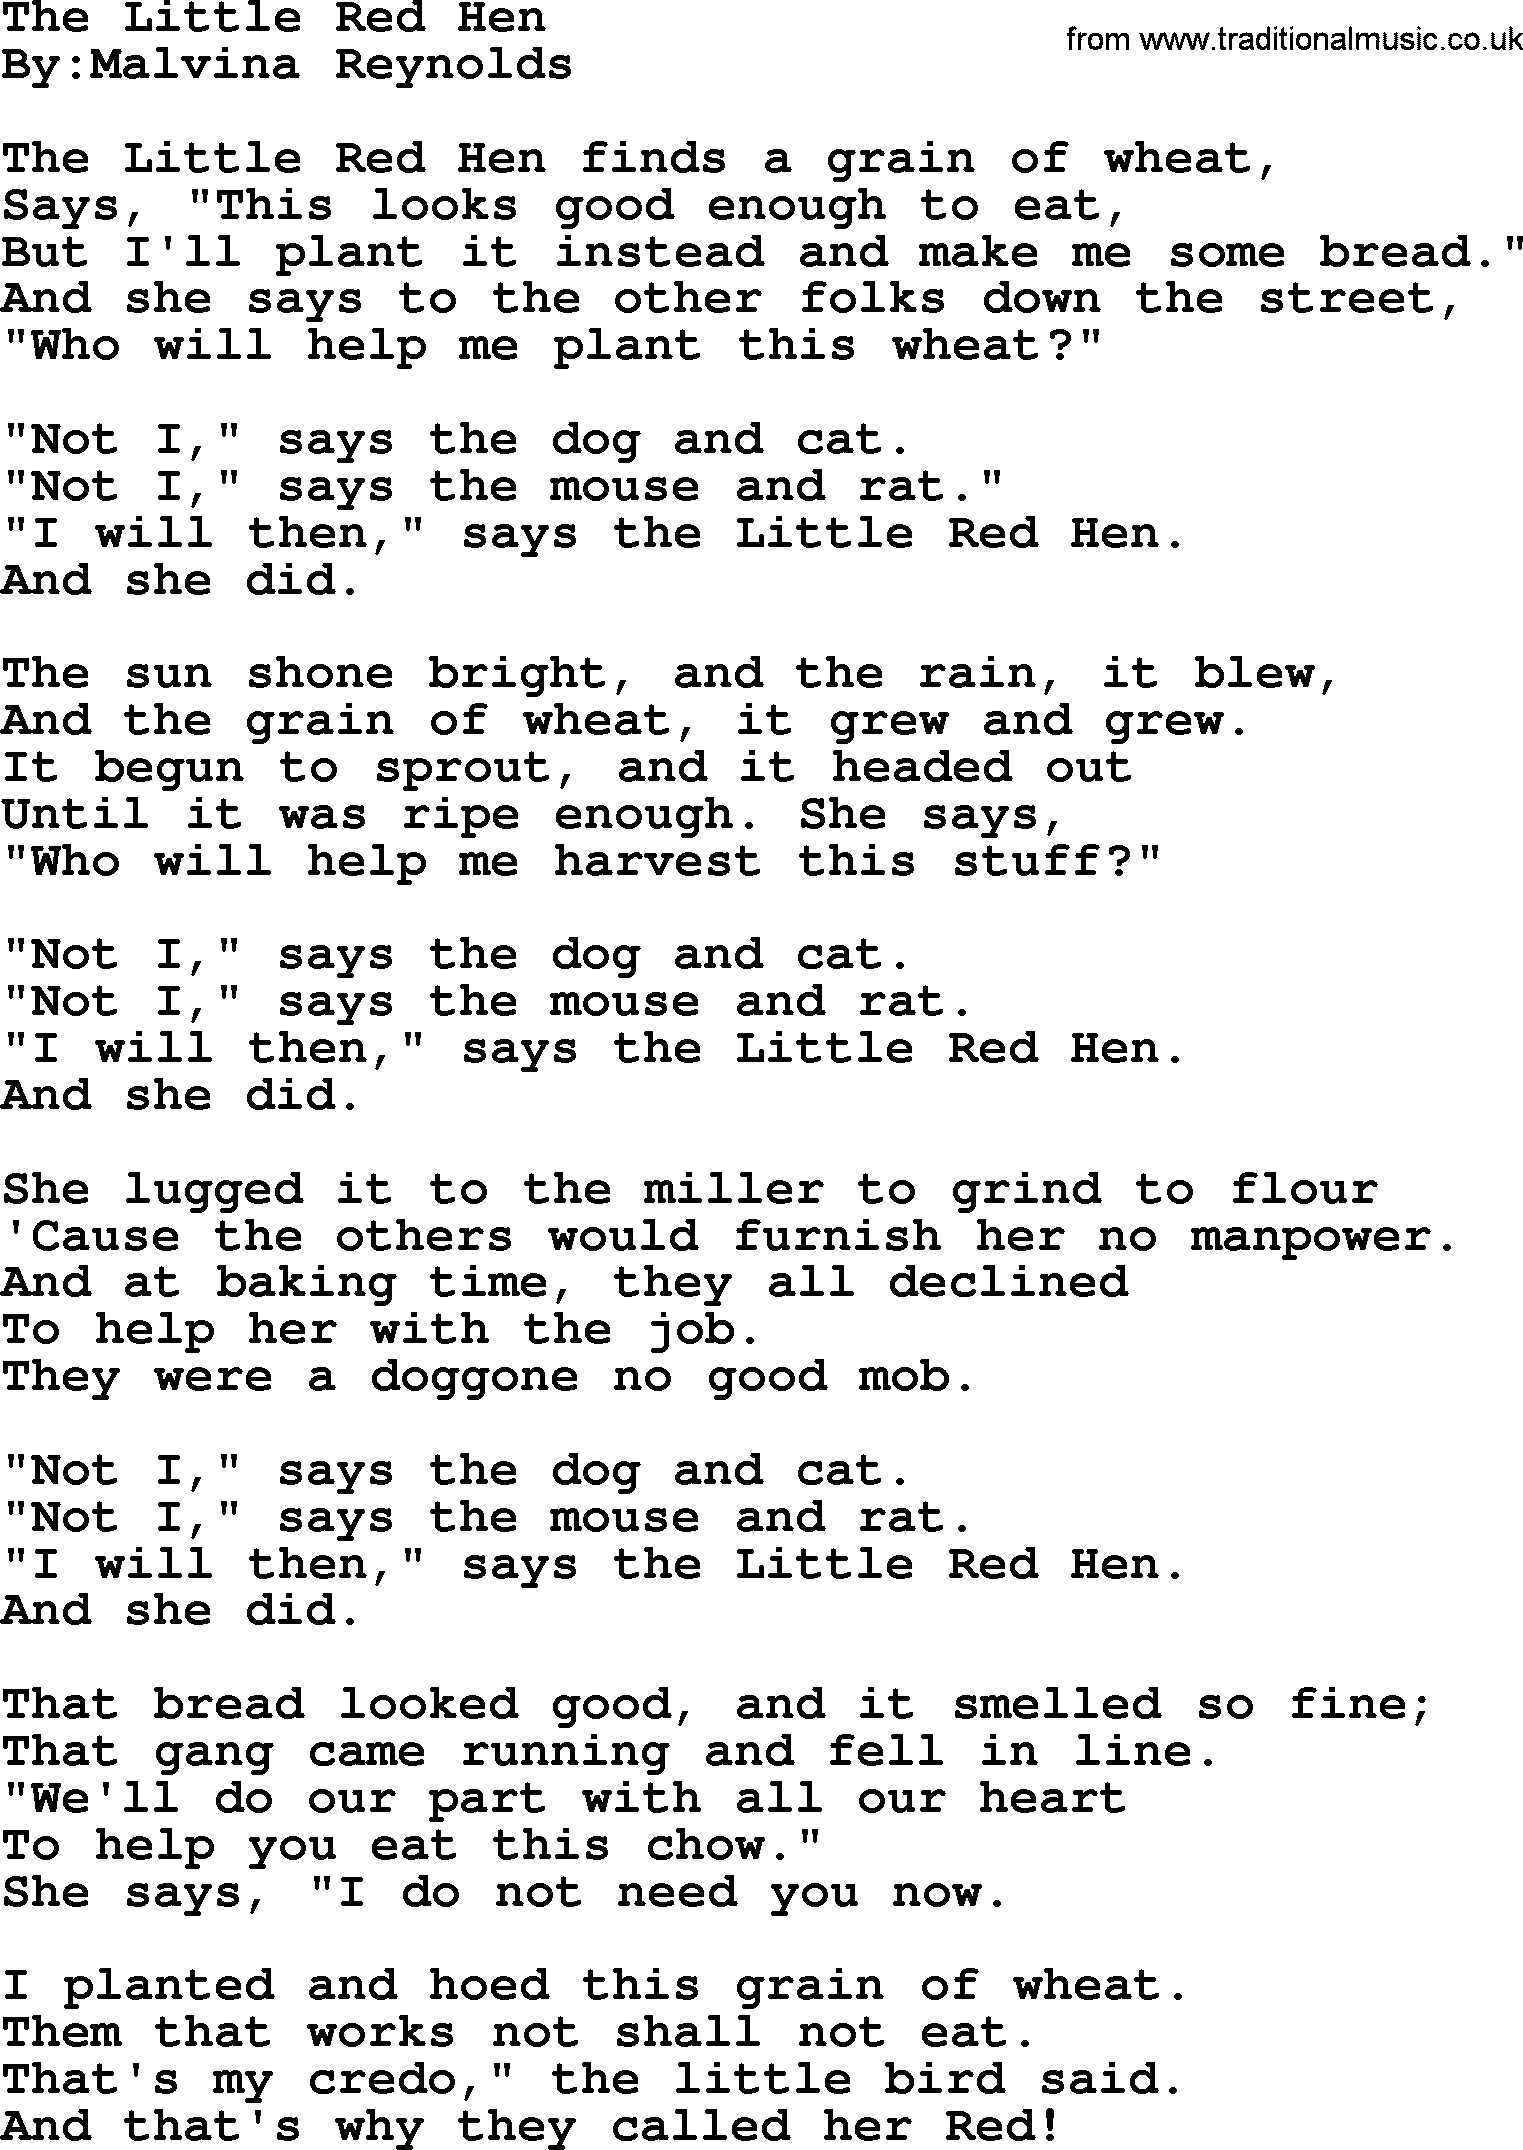 Political, Solidarity, Workers or Union song: The Little Red Hen, lyrics